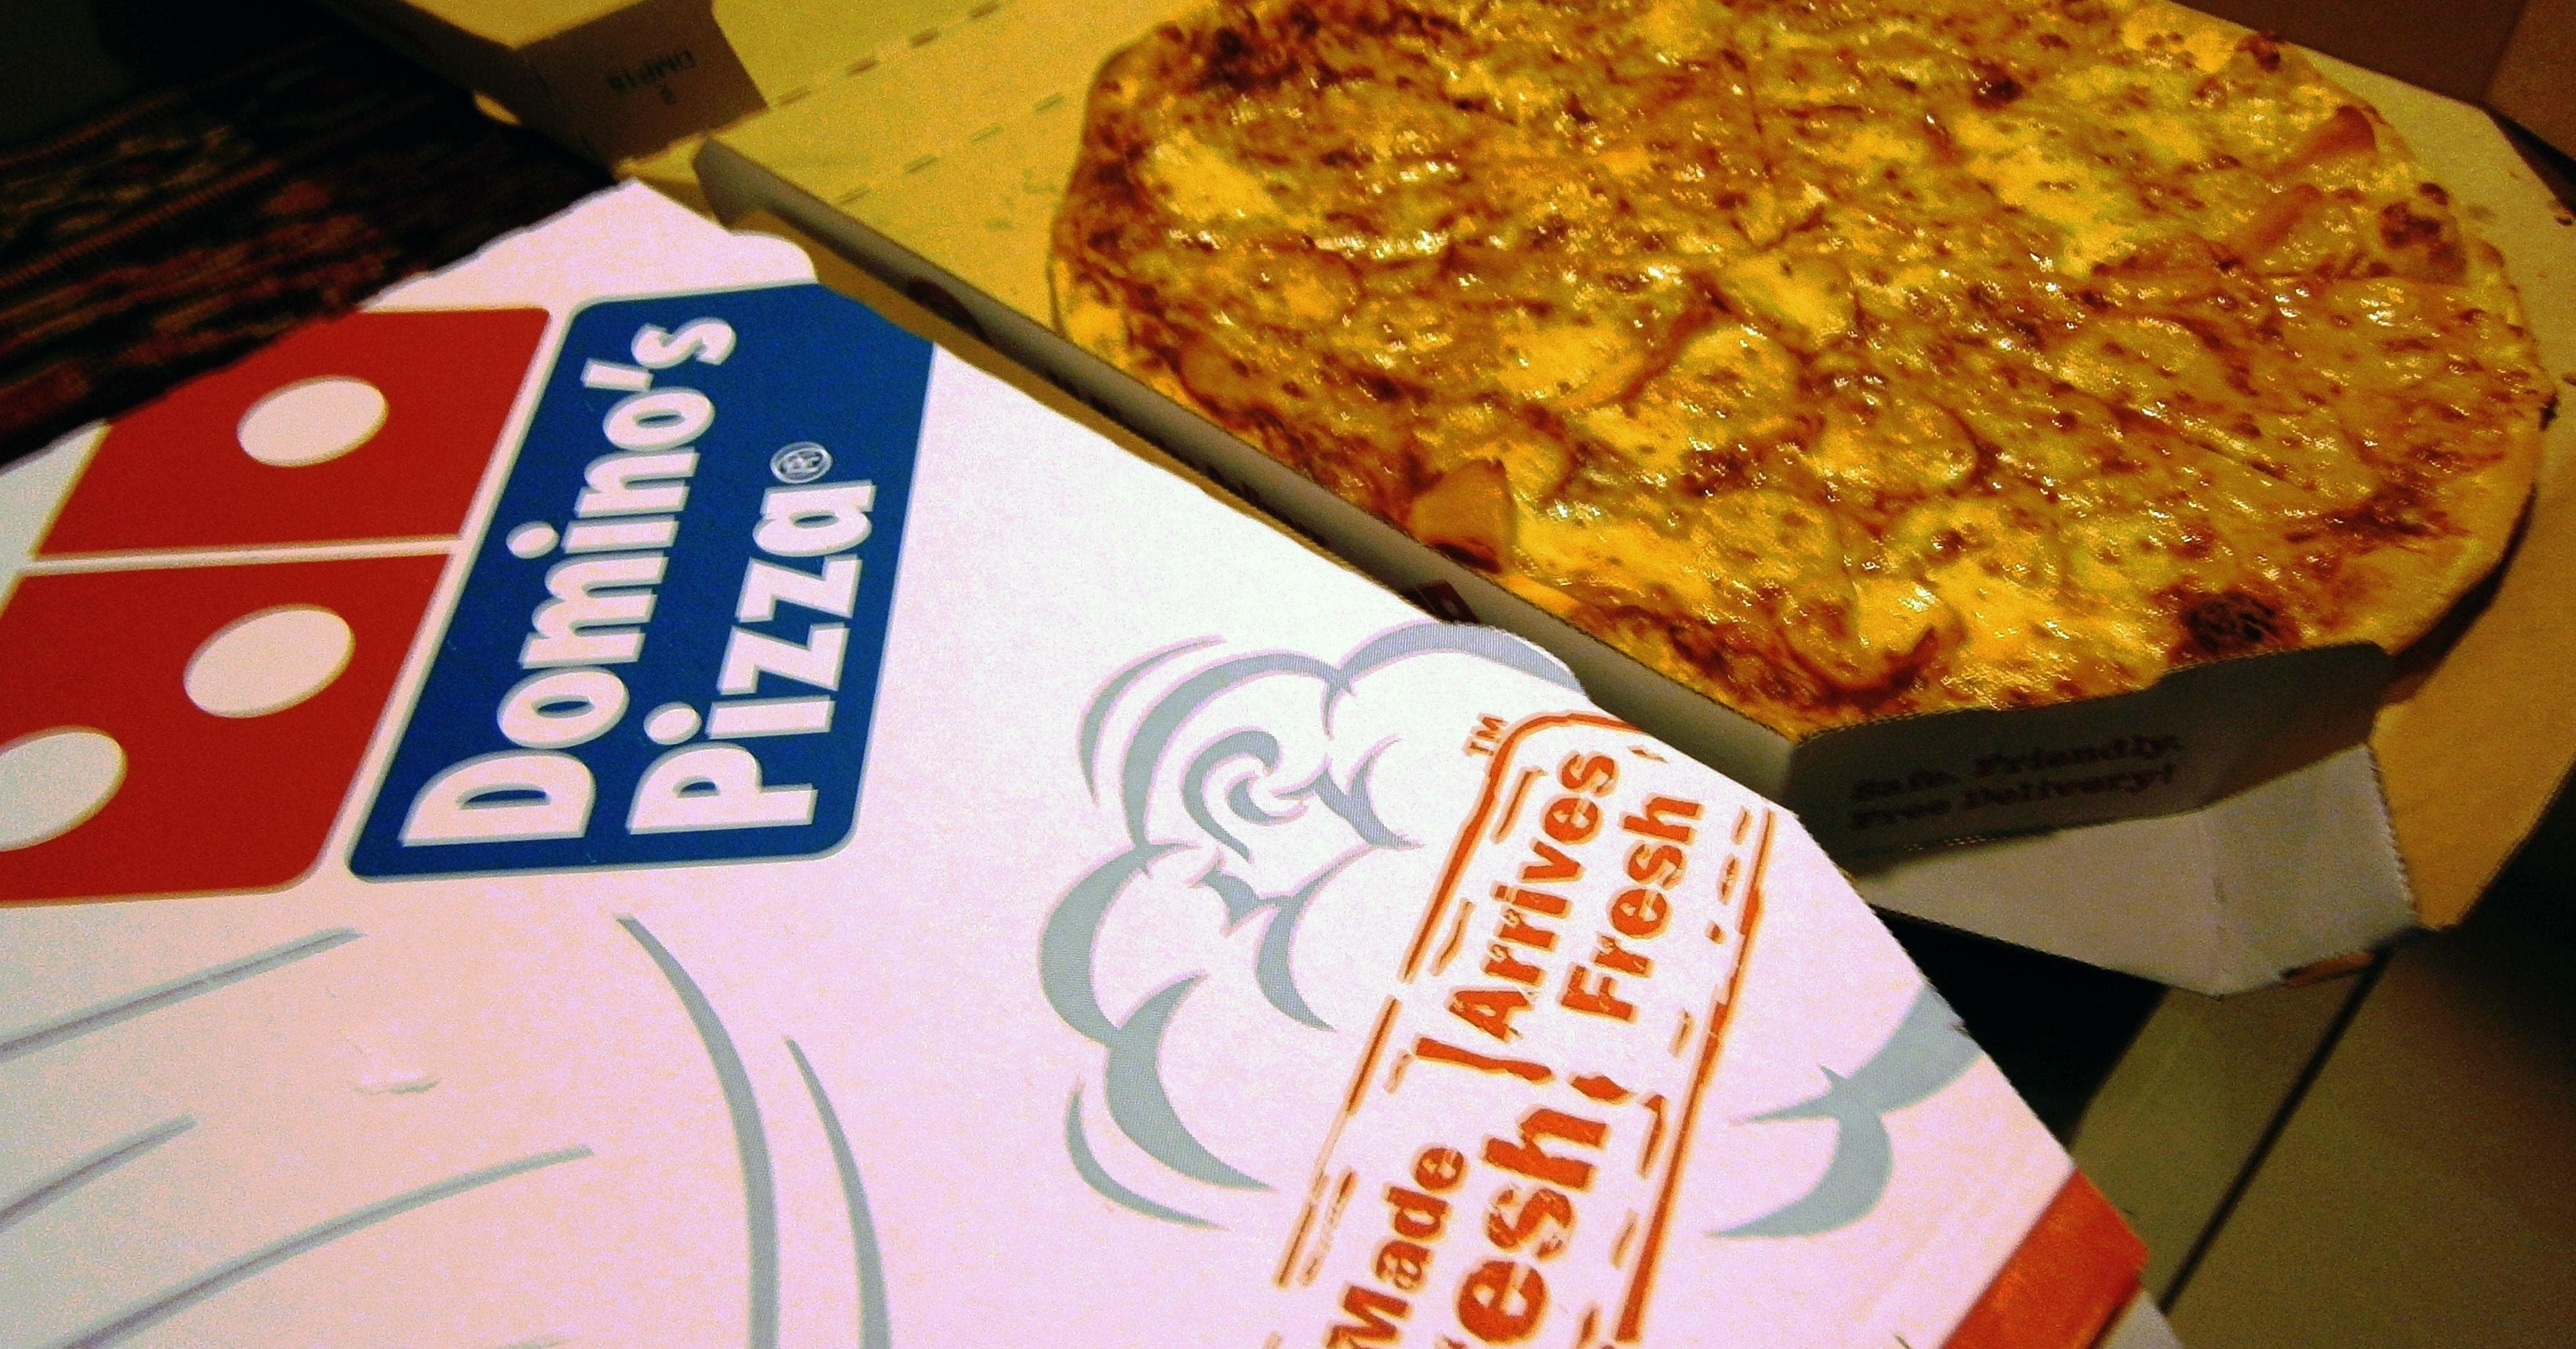 Domino's Pizza enters movie-streaming fray